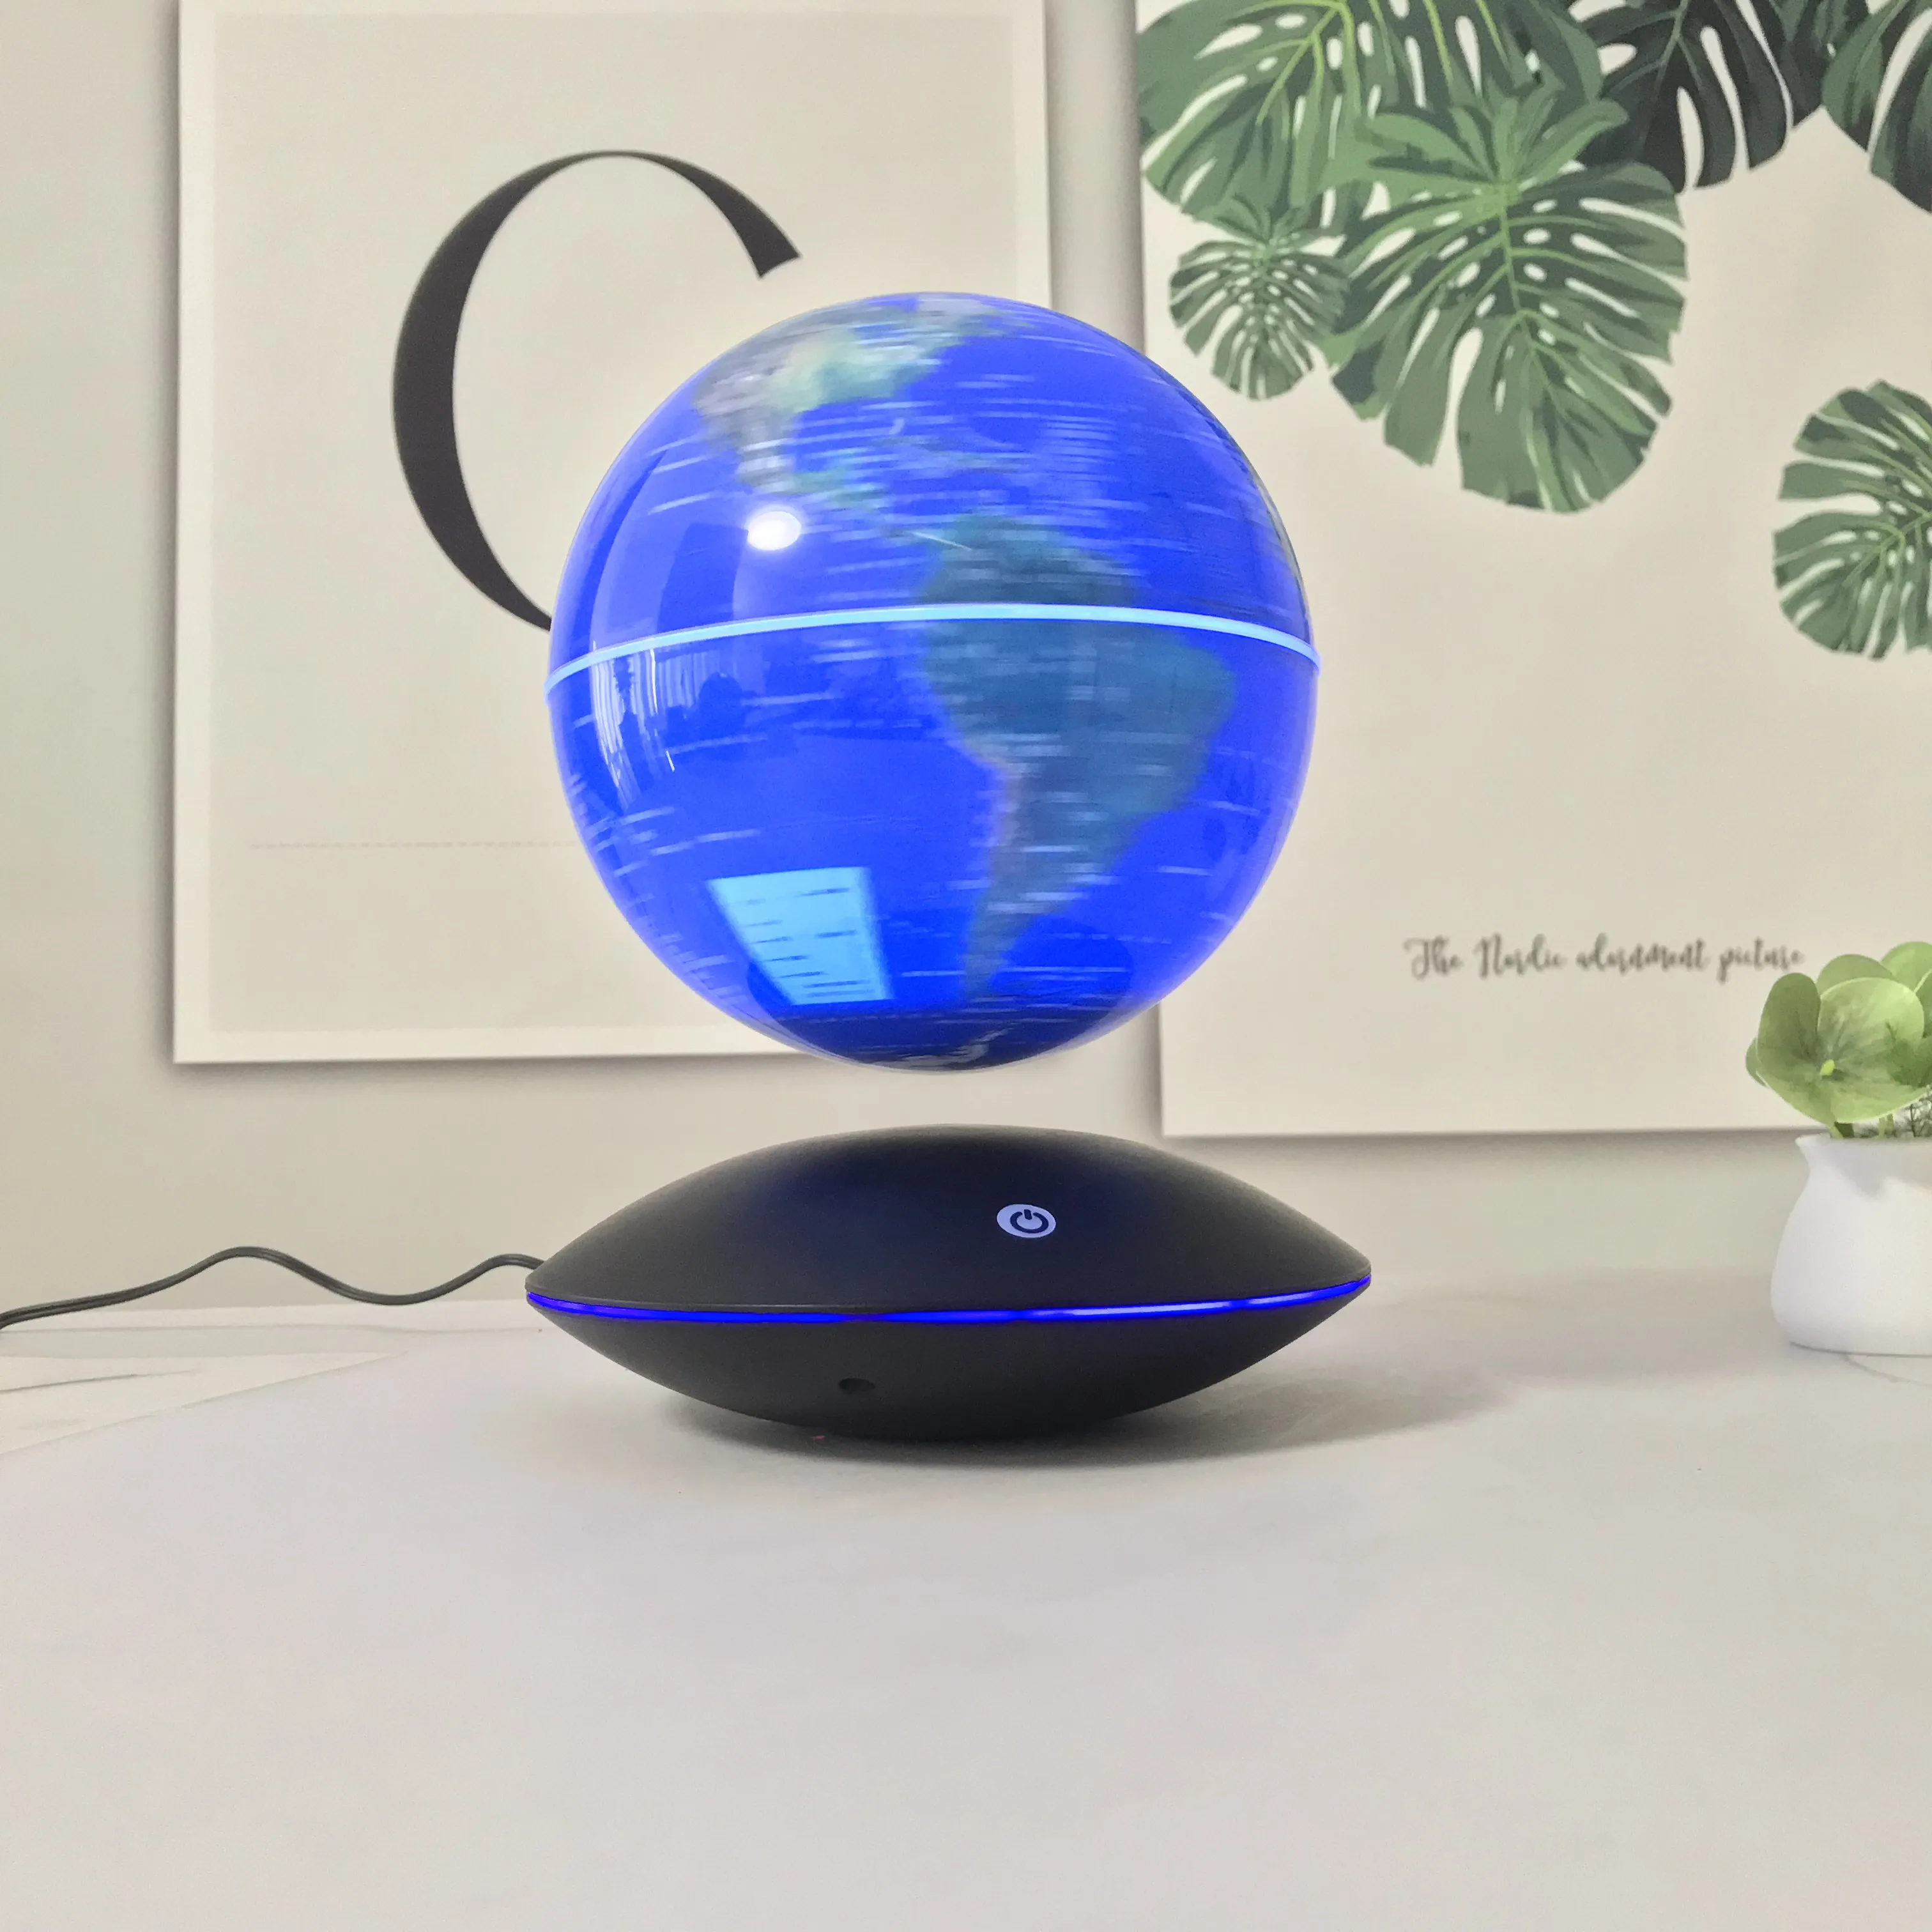 Details about   8Inches LED Lamp Magnetic Levitating Blue Tabletop Globe Office Decor US Stock 